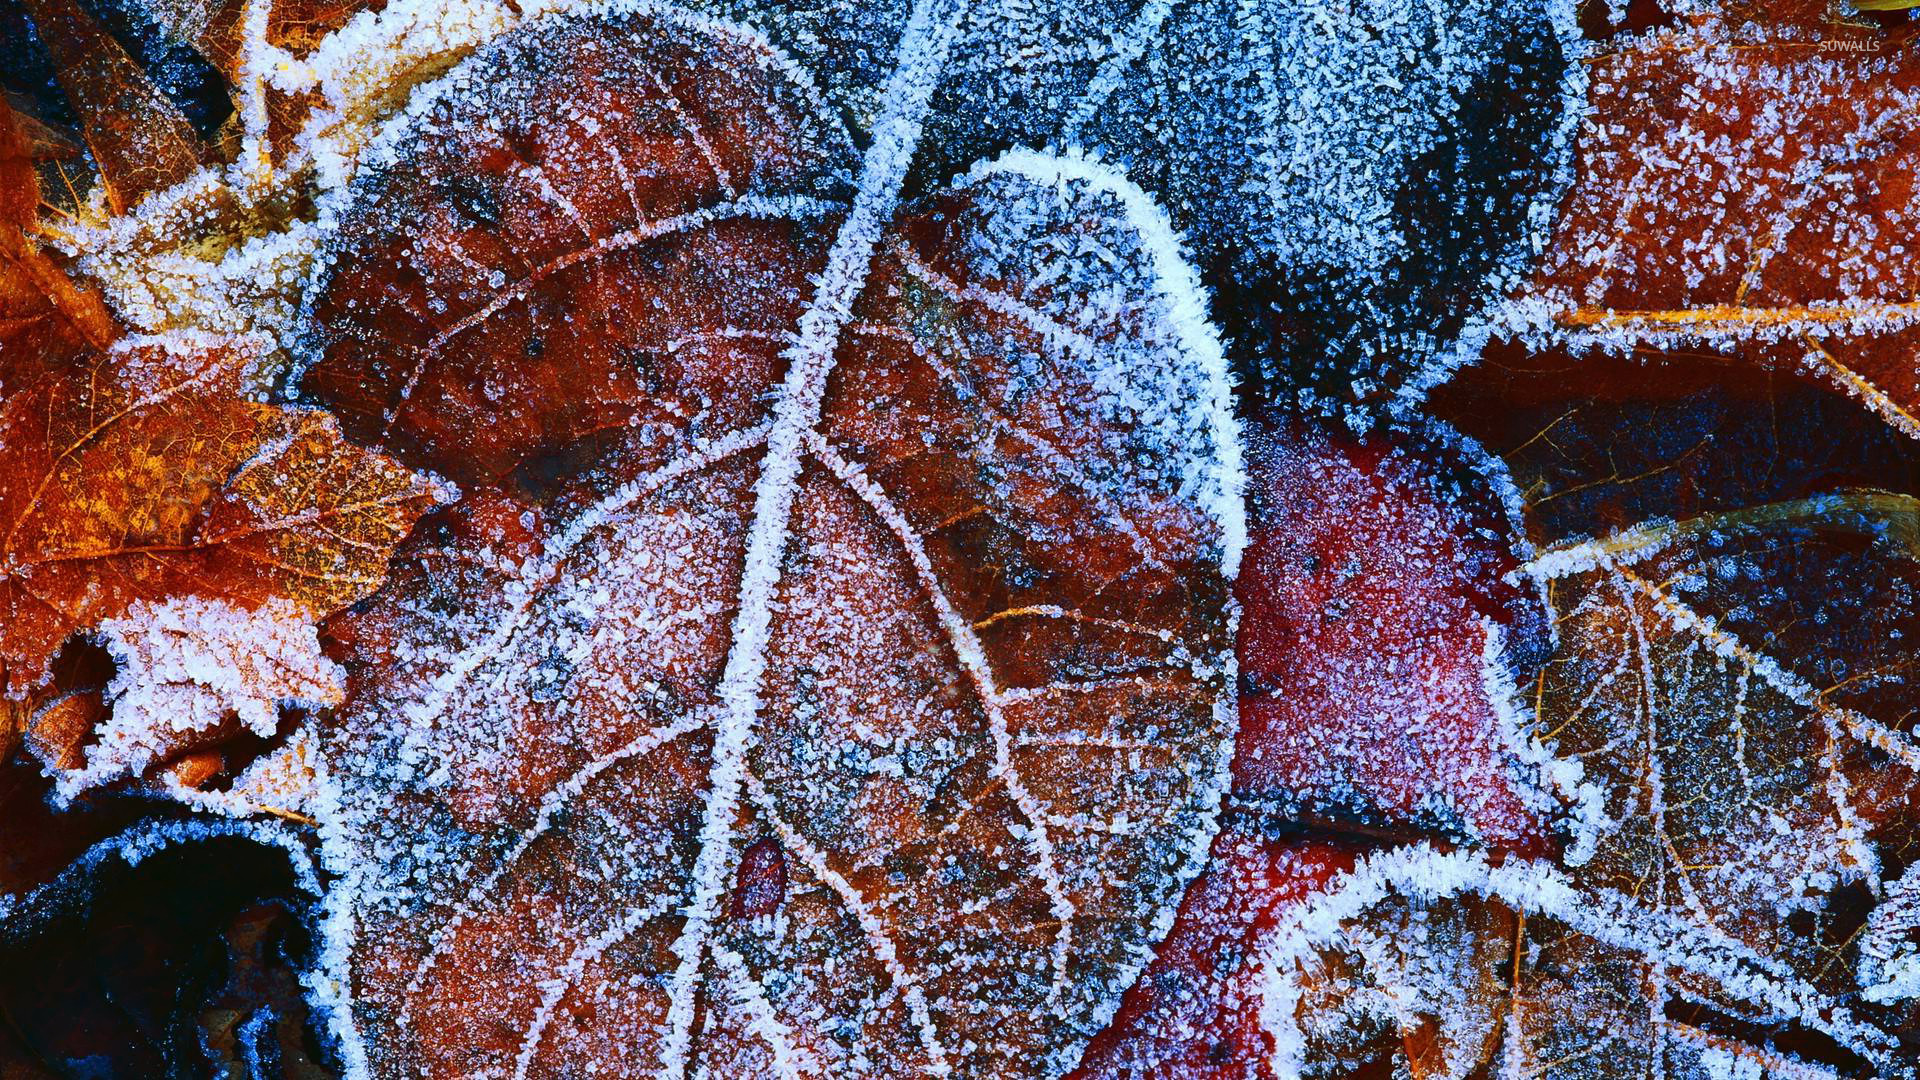 Frosty leaves wallpaper - Photography wallpapers - #16288